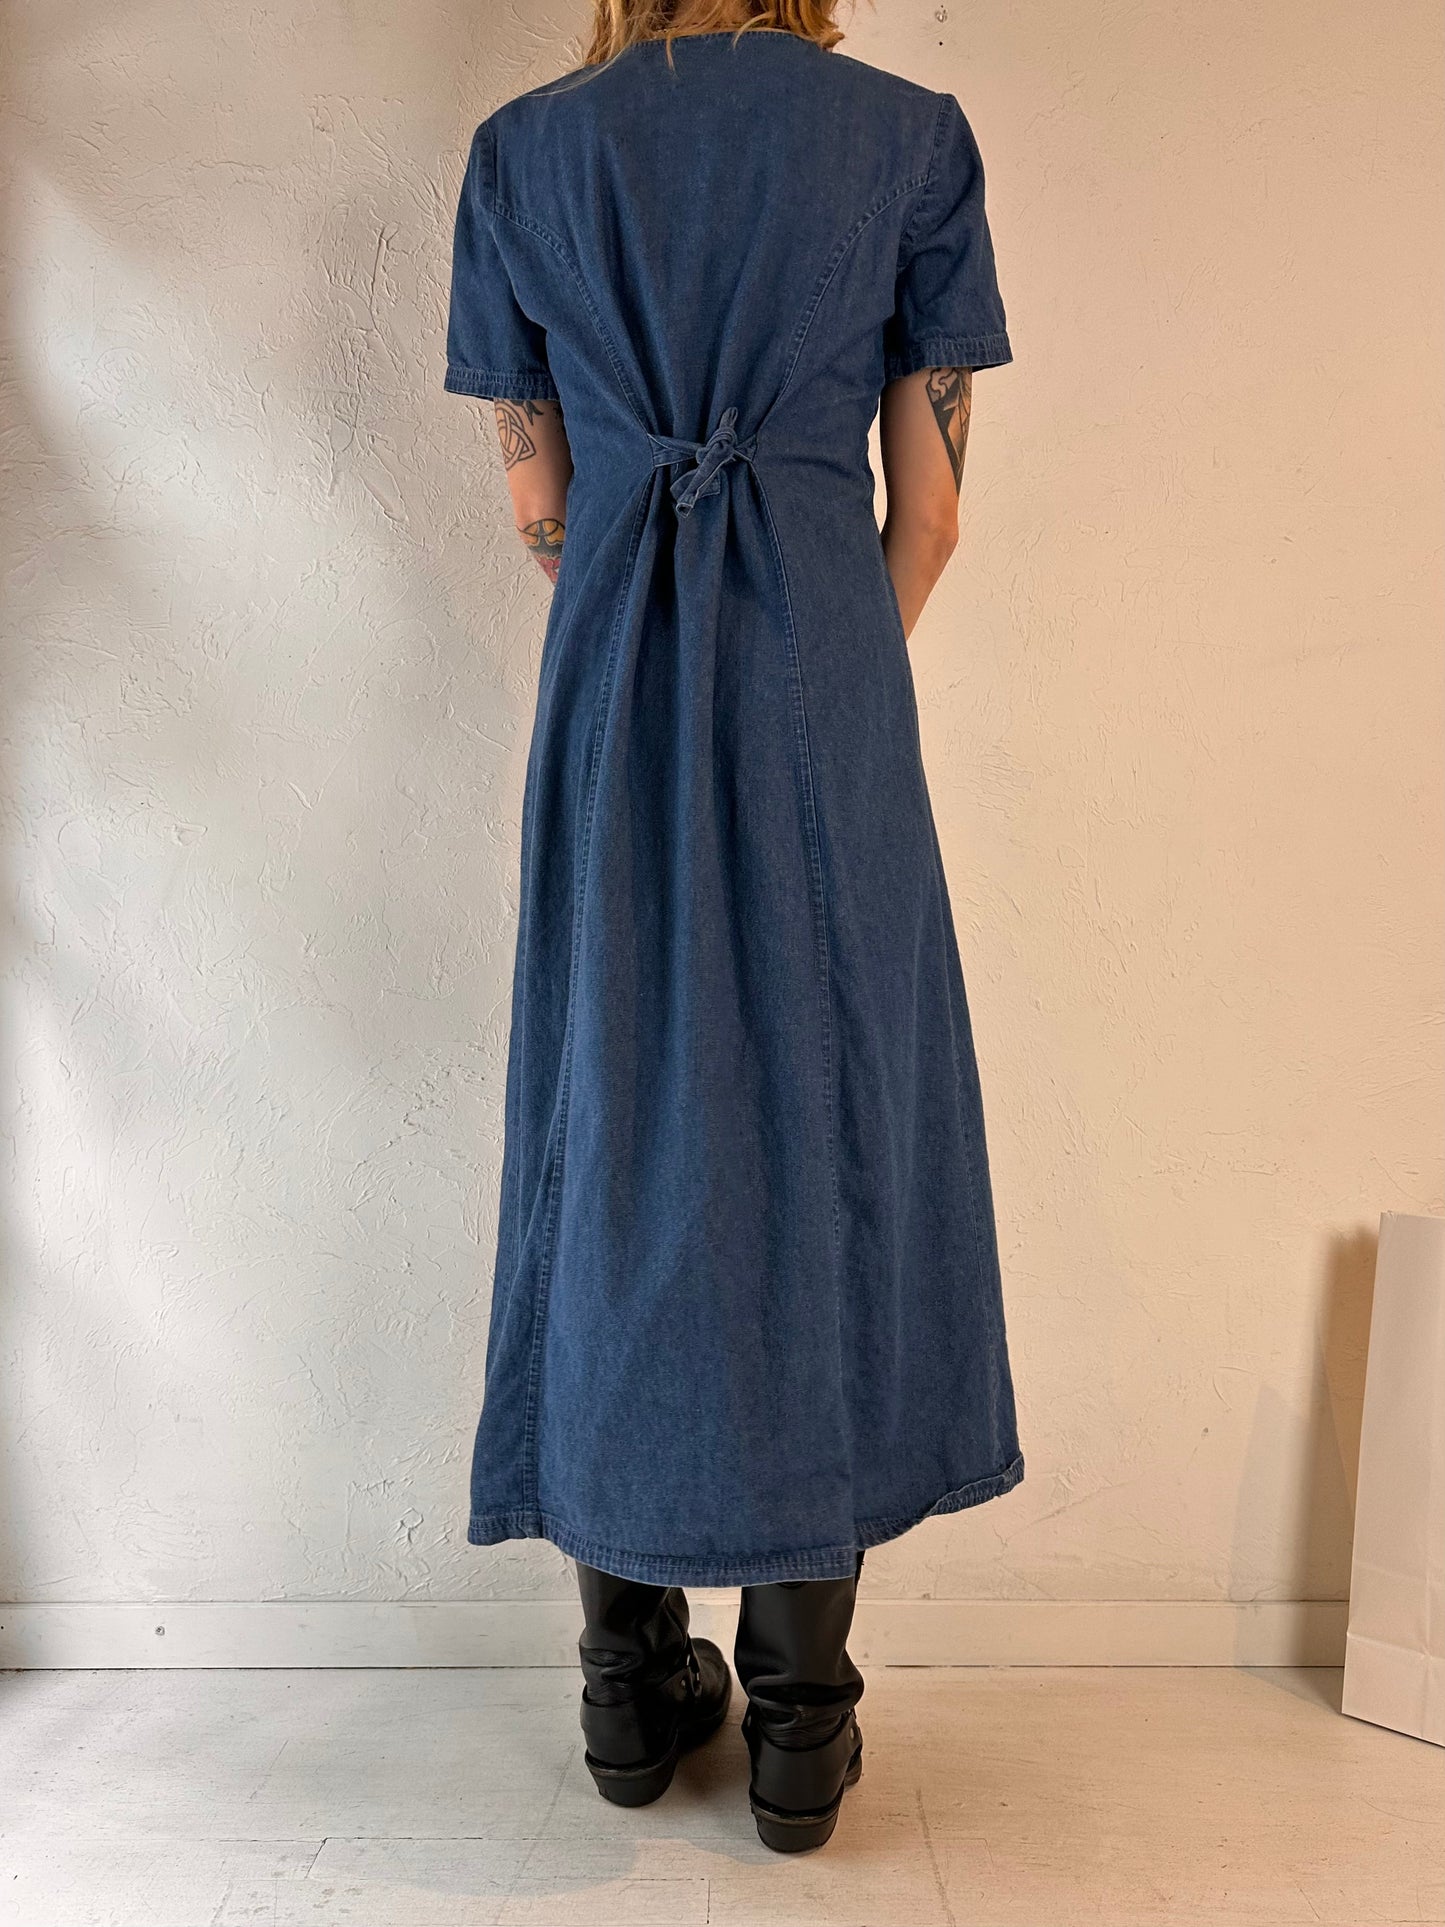 90s Button Up Embroidered Denim Dress / Small